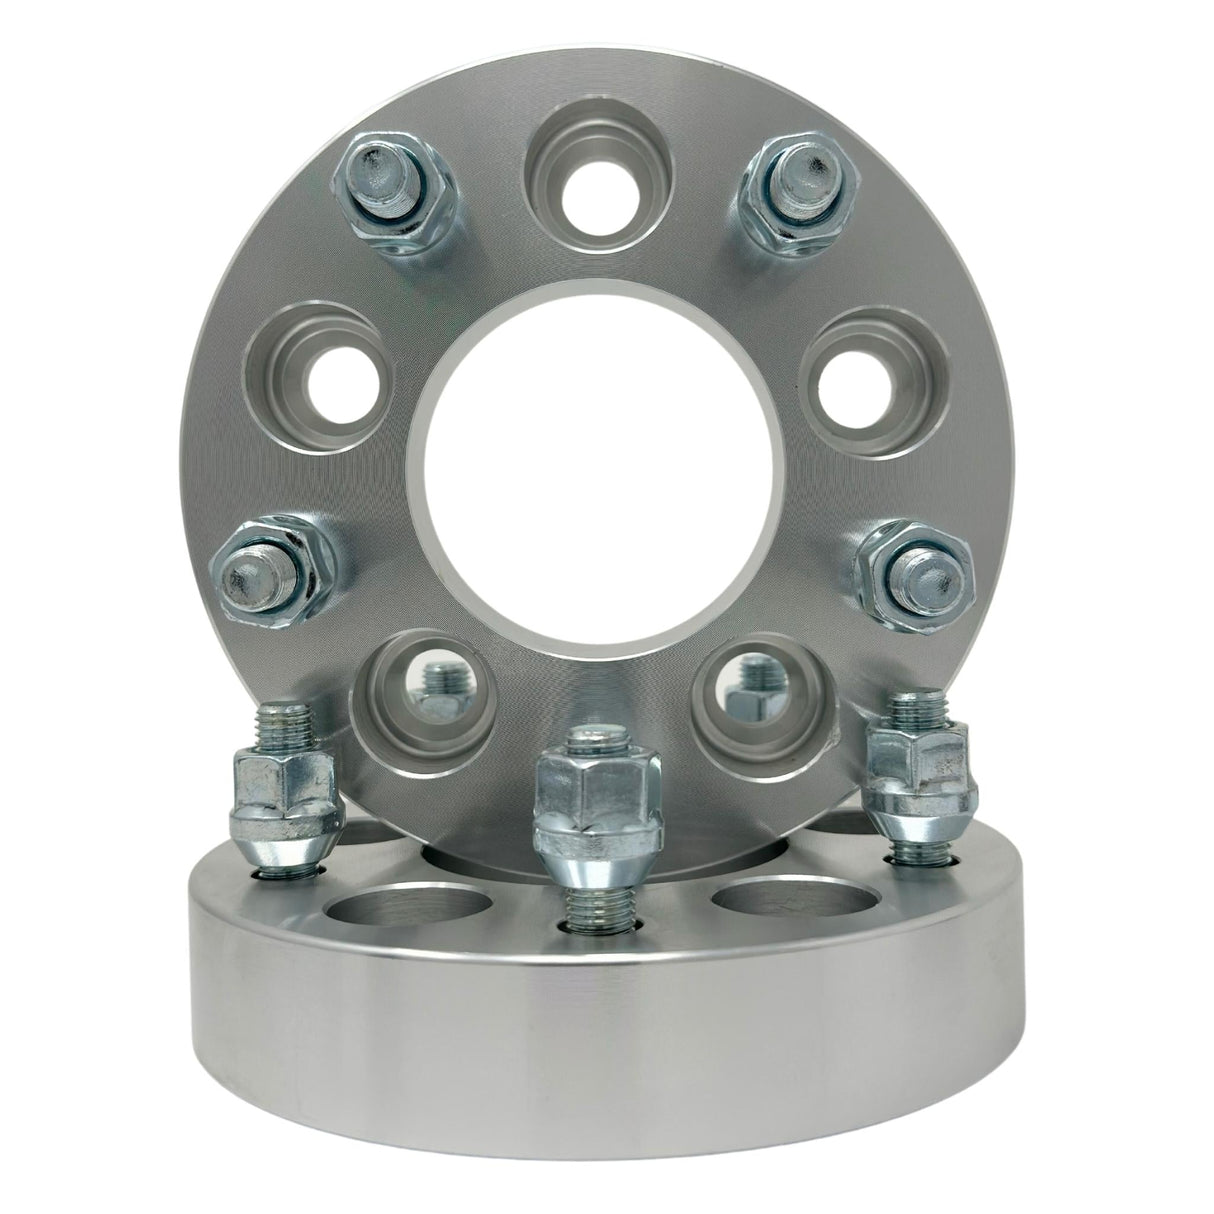 5x120.7 to 5x114.3 Wheel Adapters Use 5x114.3 Wheels on 5x120.7 vehicles 1" inch & 1.25" Inch (25mm & 32mm) 12x1.5 Studs & Lug Nuts 74mm Center Bore | Also known as 5x4.75 to 5x4.5